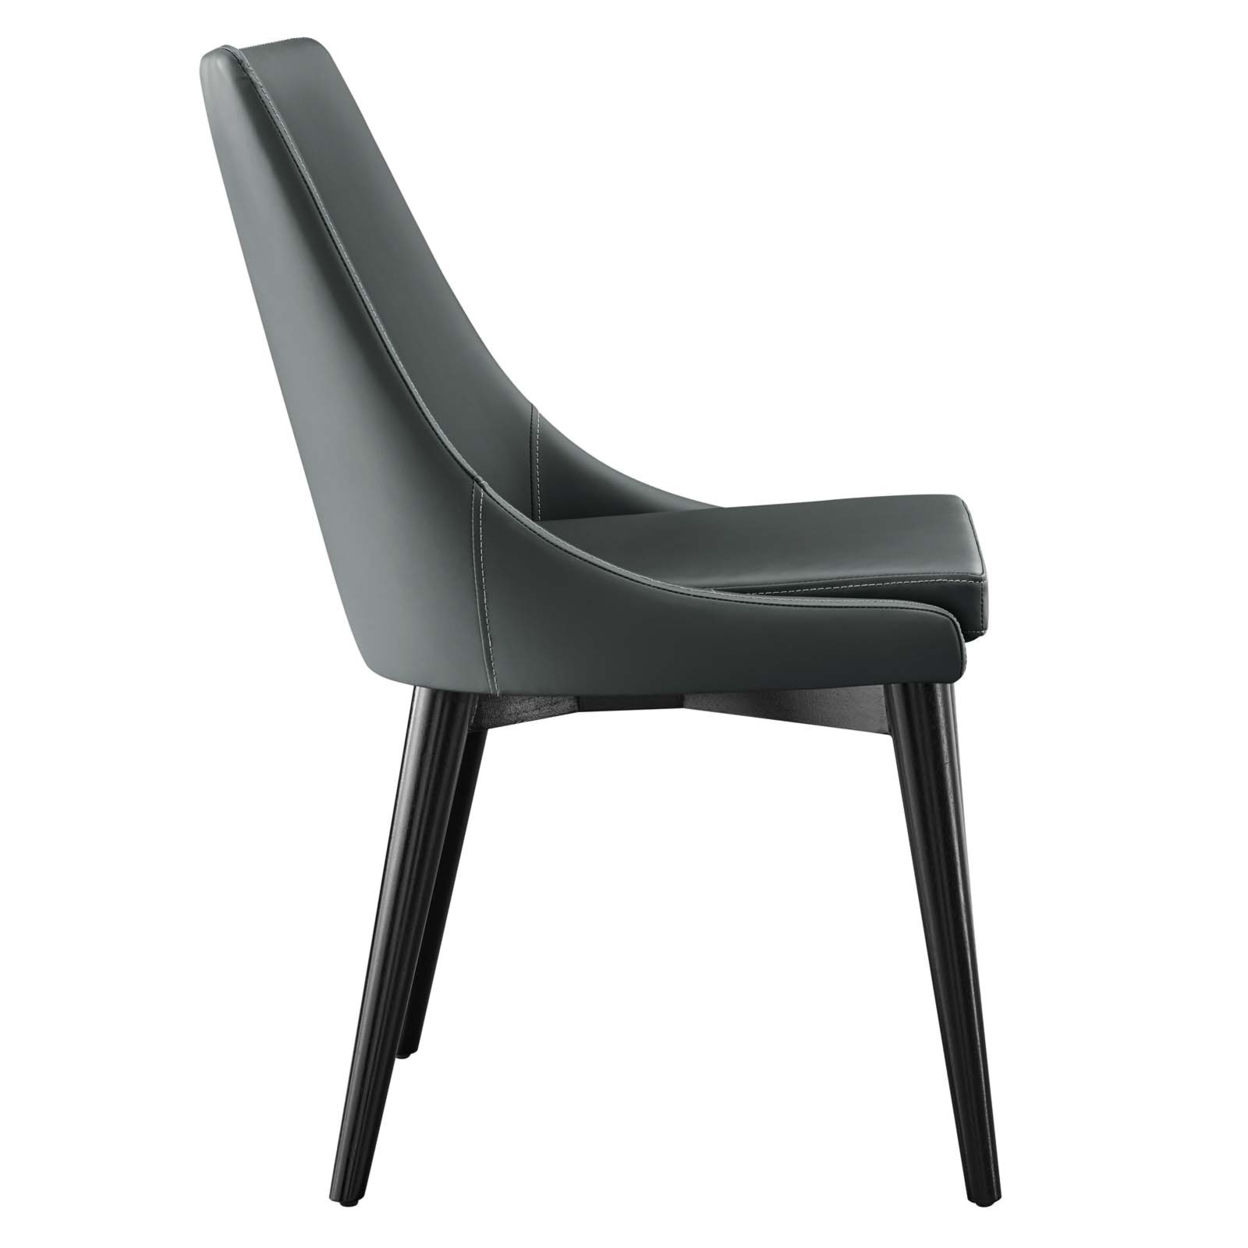 Viscount Vegan Leather Dining Chair, Gray